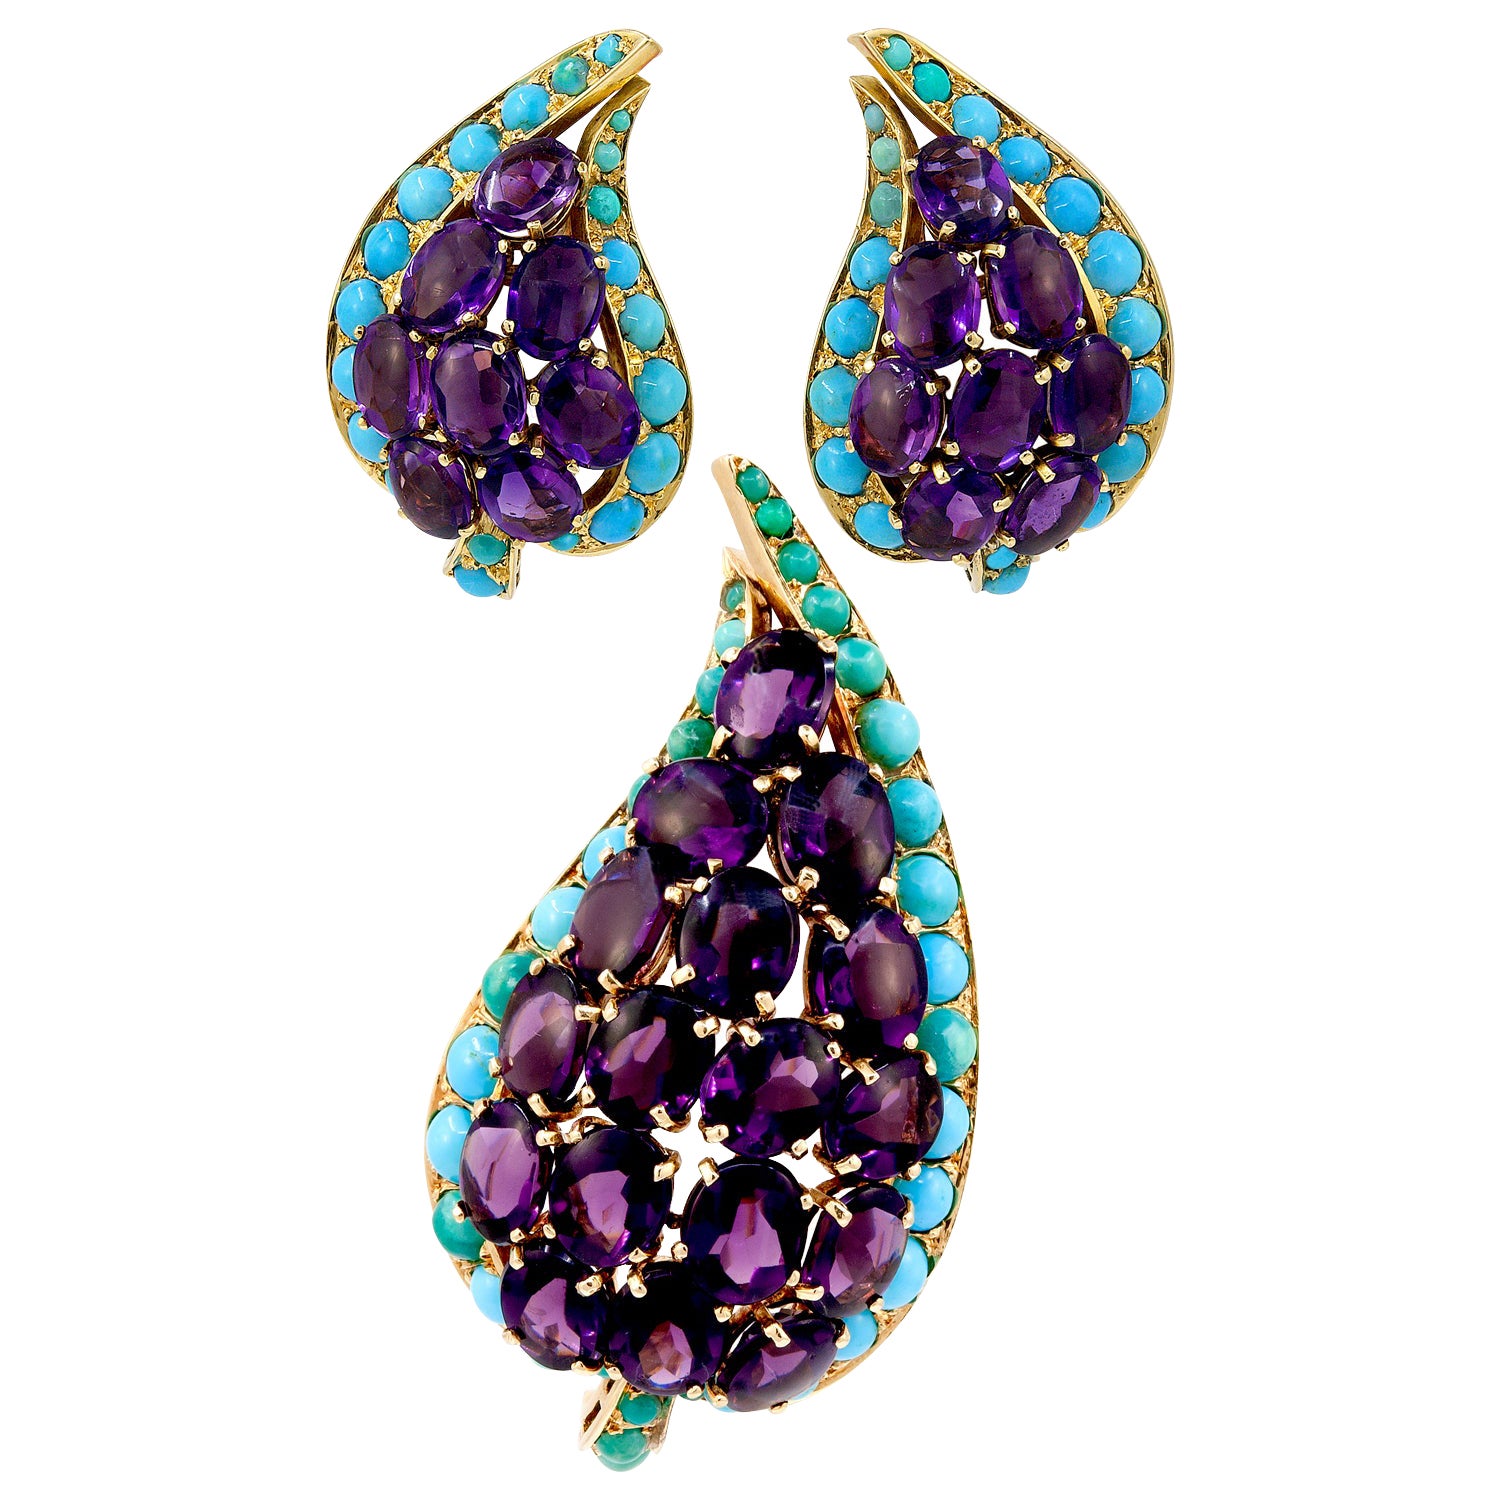 Cabochon Amethyst, Turquoise Paisley Brooch & Earrings